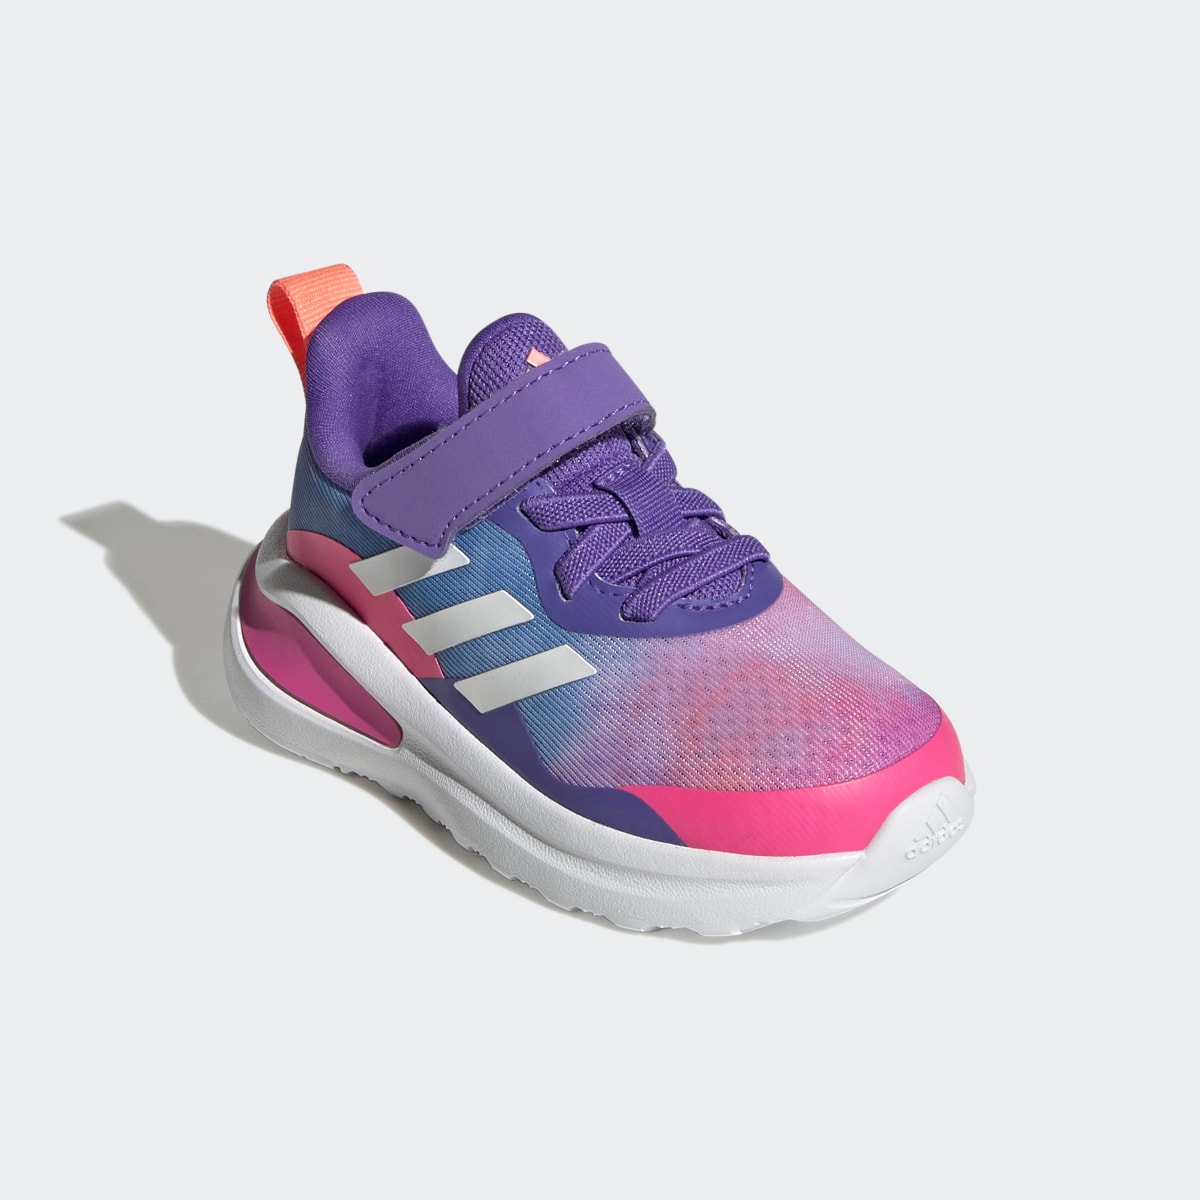 Adidas FortaRun International Women's Day Graphic Elastic Lace Top Strap Running Shoes. 5